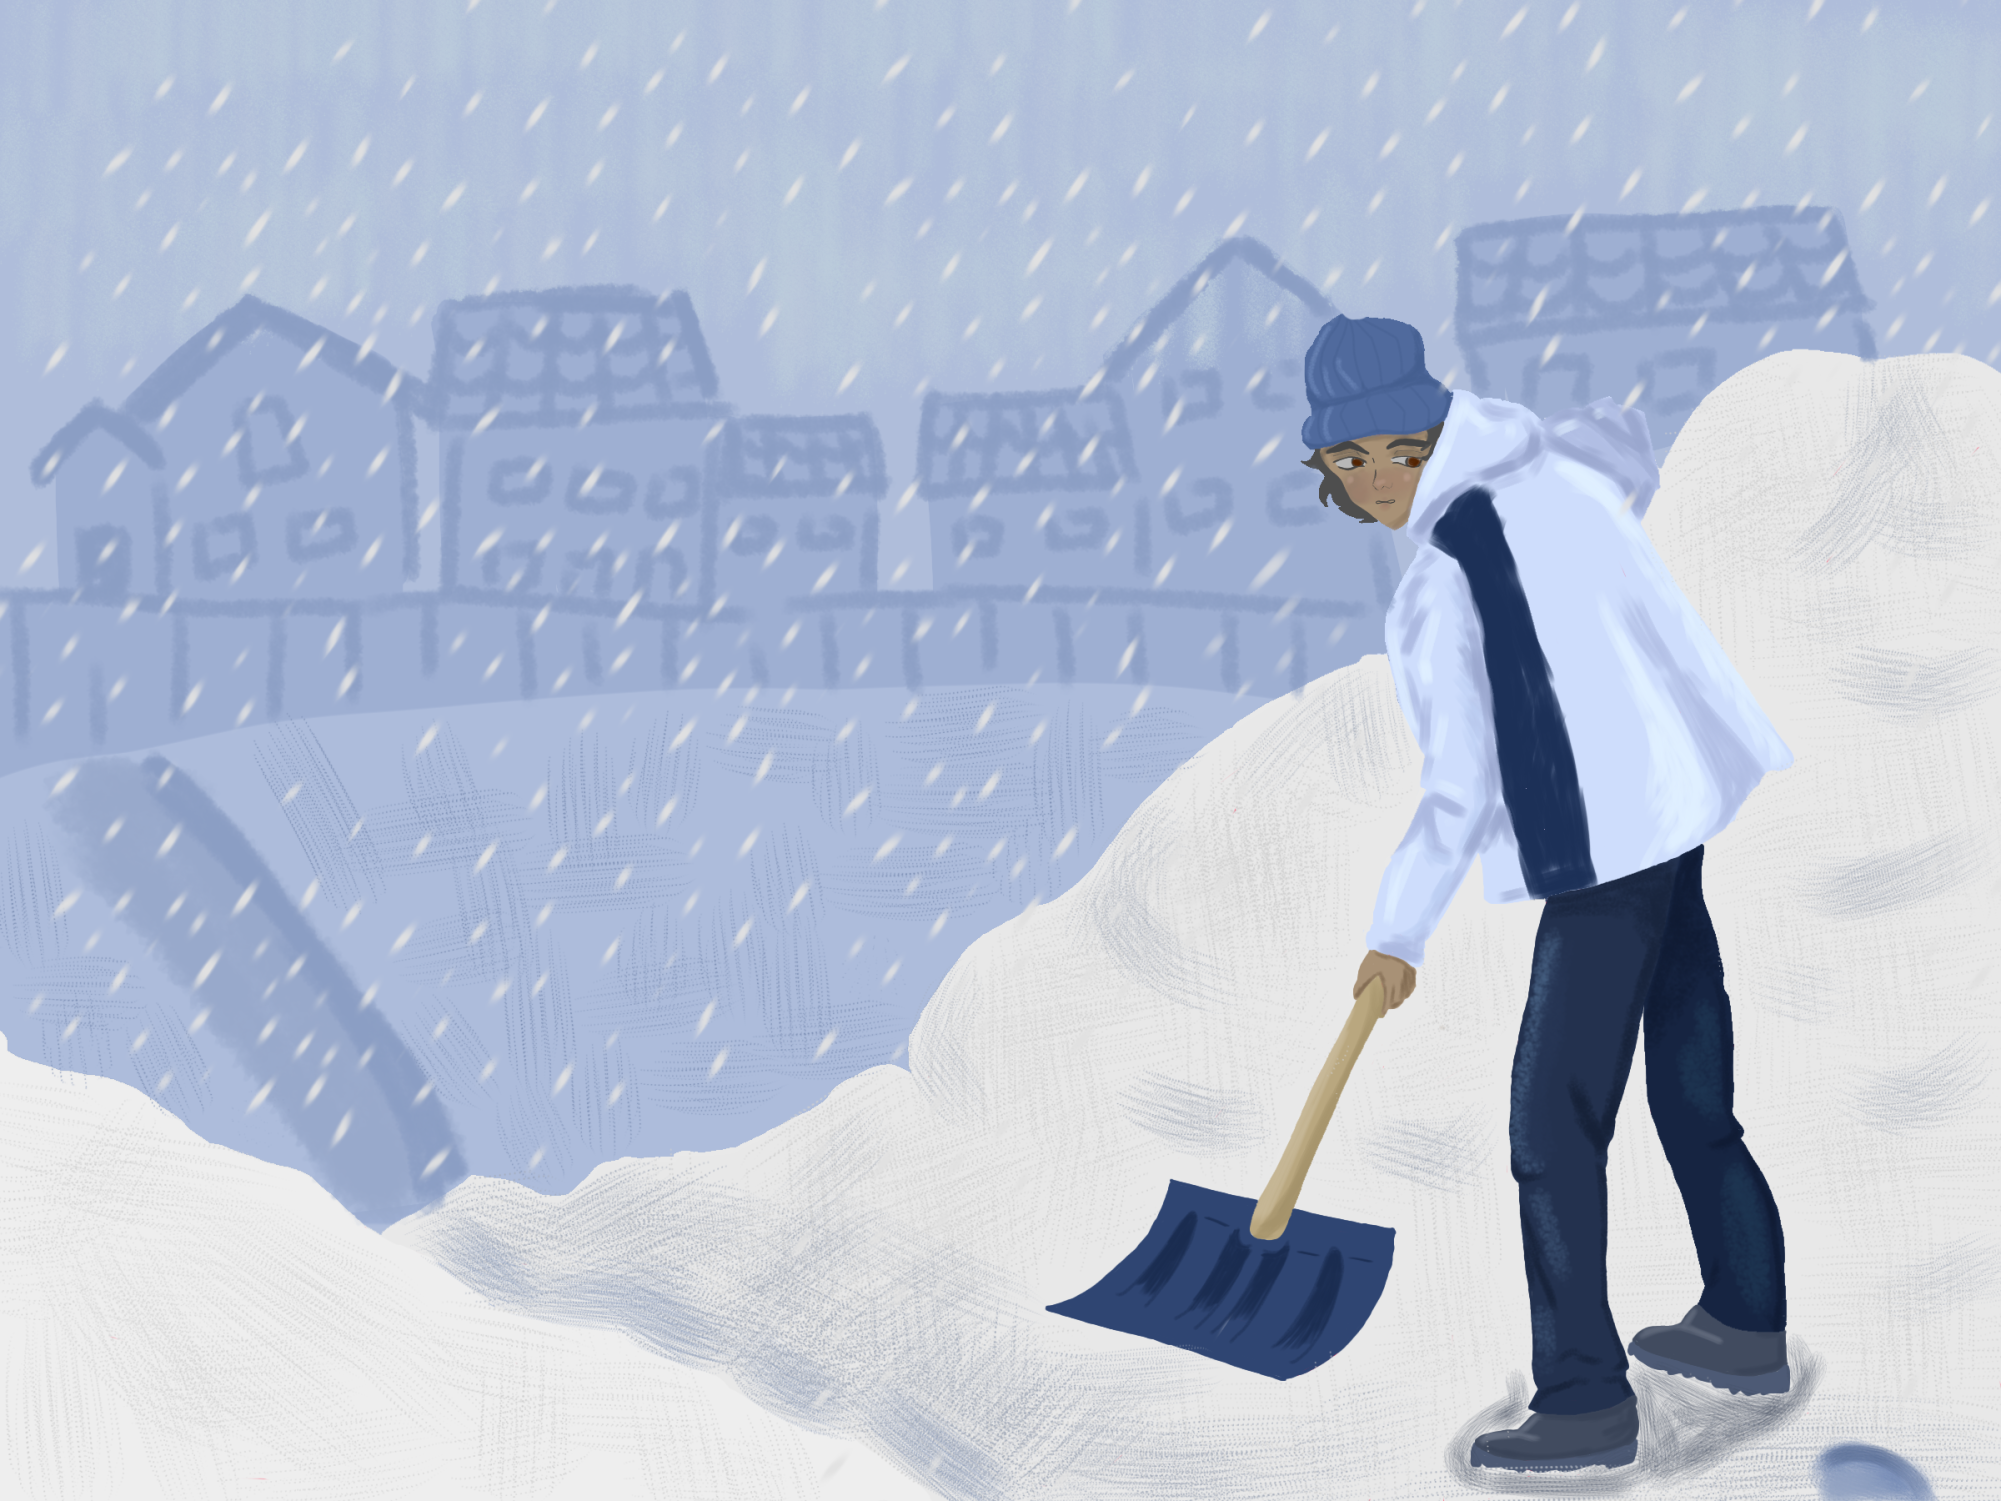 Shoveling snow is a struggle many who live in the mountains have to face